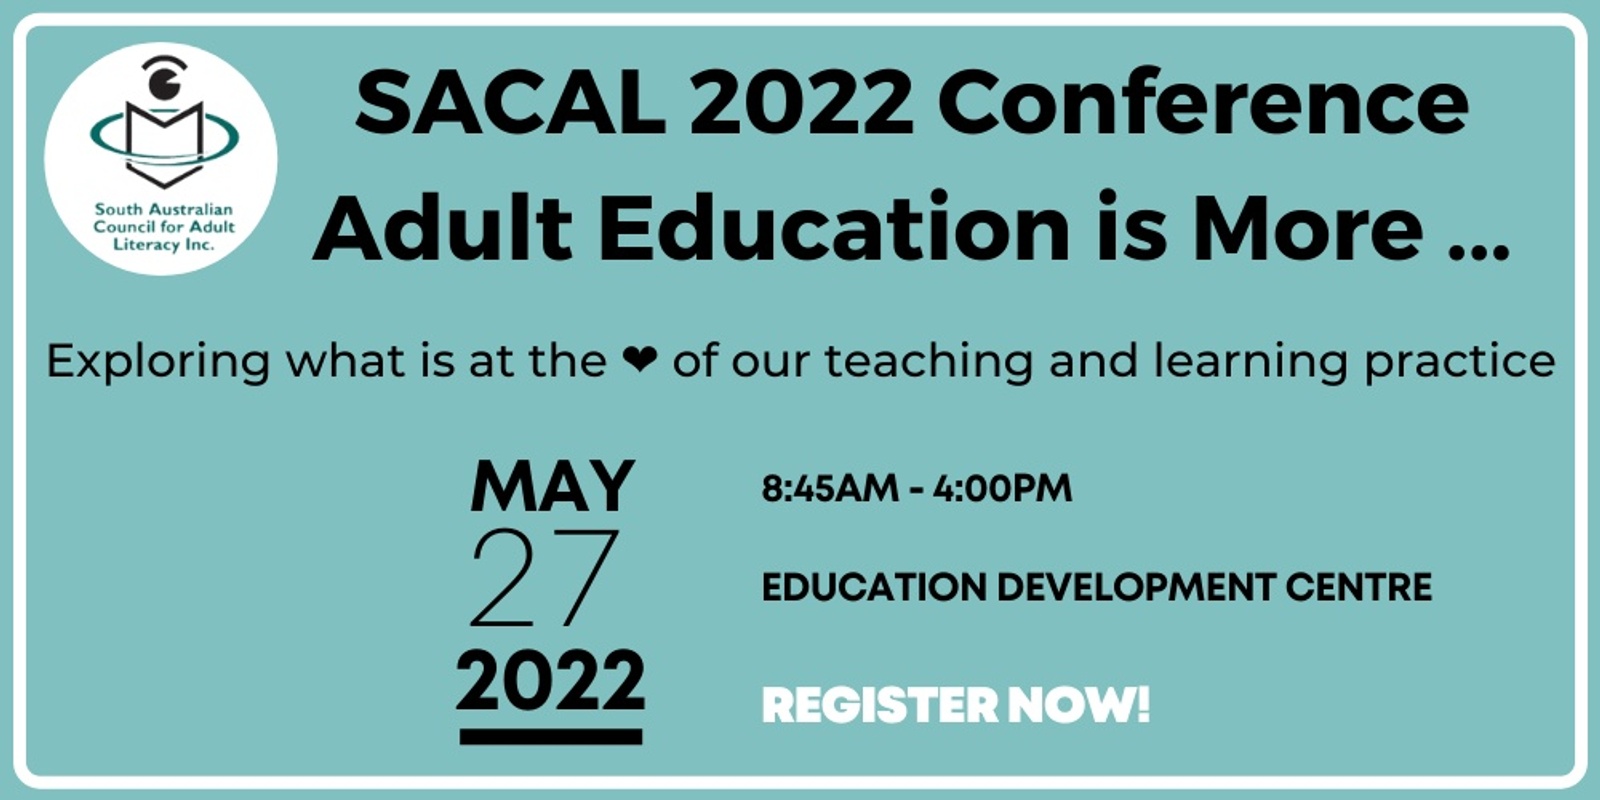 Banner image for SACAL 2022 Conference - Adult Education is More ... exploring what is at the ❤ of our teaching and learning practice